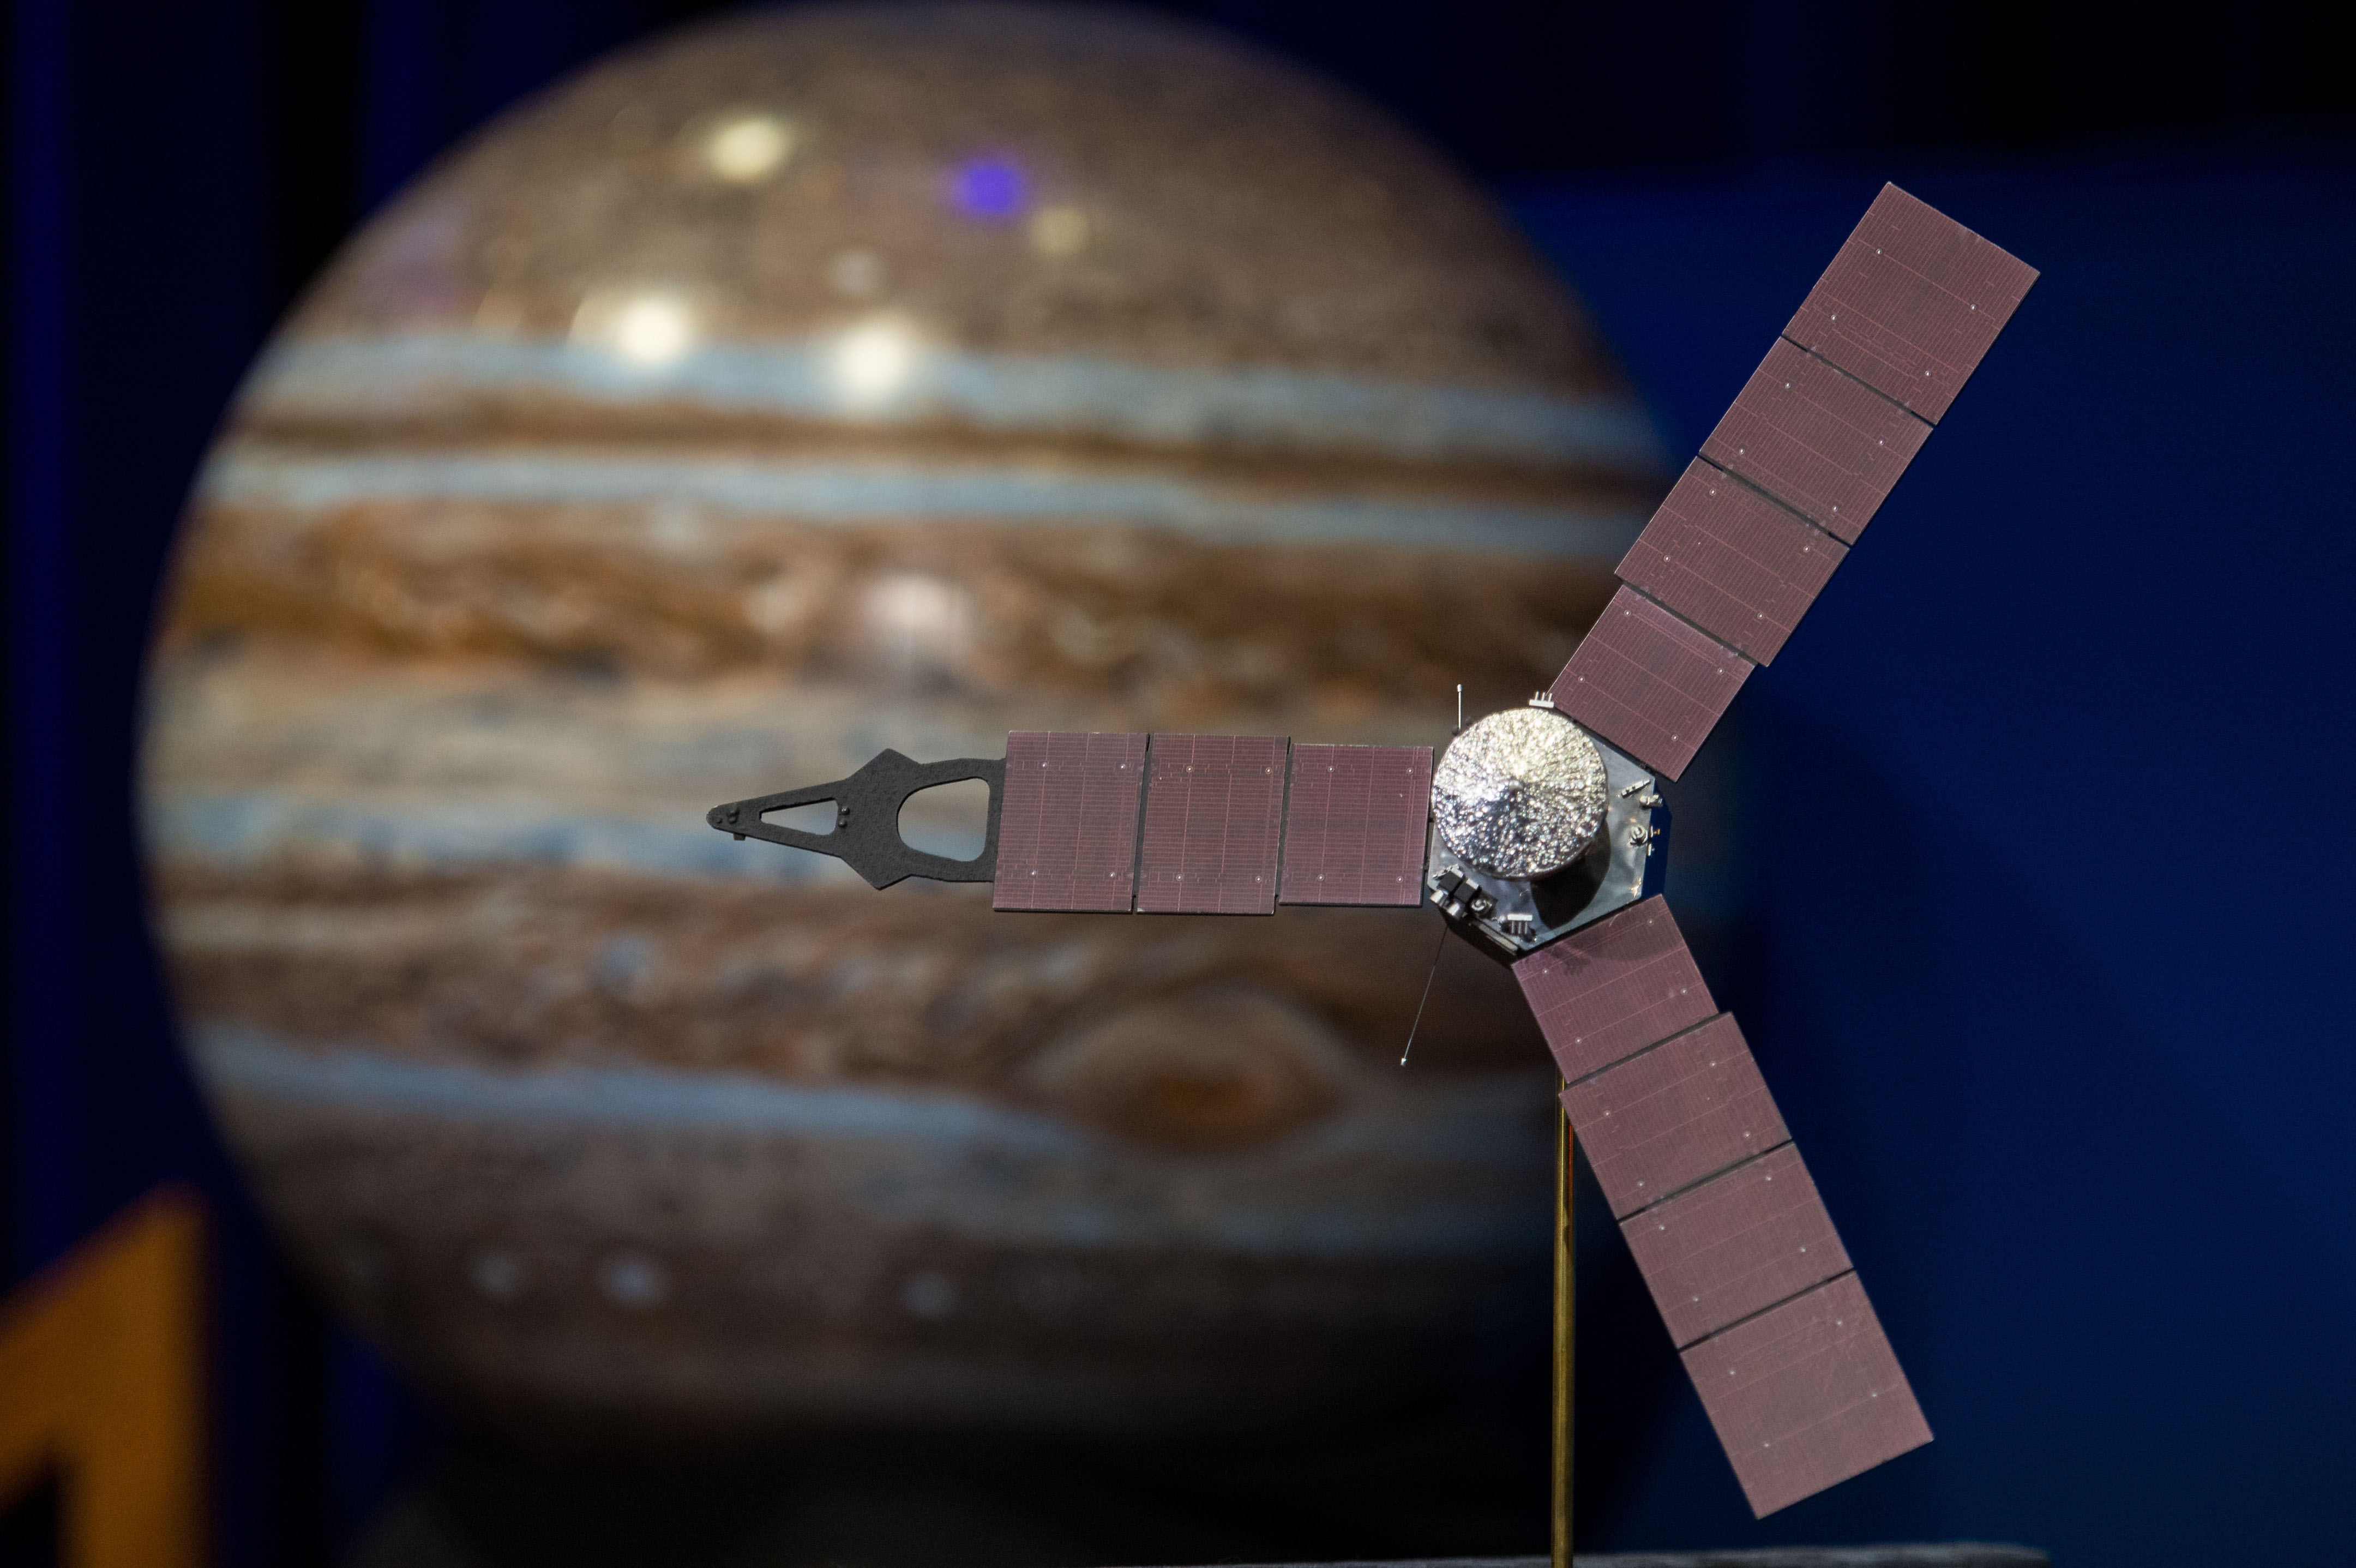 This NASA photo obtained July 4, 2016 shows a model of the Juno spacecraft at a news briefing, held before Juno enters orbit around Jupiter, on June 30, 2016 at the Jet Propulsion Laboratory (JPL) in Pasadena, CA.  The Juno mission launched August 5, 2011 and will arrive at Jupiter July 4, 2016 to orbit the planet for 20 months and collect data on the planetary core, map the magnetic field, and measure the amount of water and ammonia in the atmosphere. / AFP PHOTO / (NASA/Aubrey Gemignani) / NASA/Aubrey GEMIGNANI / RESTRICTED TO EDITORIAL USE - MANDATORY CREDIT "AFP PHOTO / NASA/AUBREY GEMIGNANI" - NO MARKETING NO ADVERTISING CAMPAIGNS - DISTRIBUTED AS A SERVICE TO CLIENTS